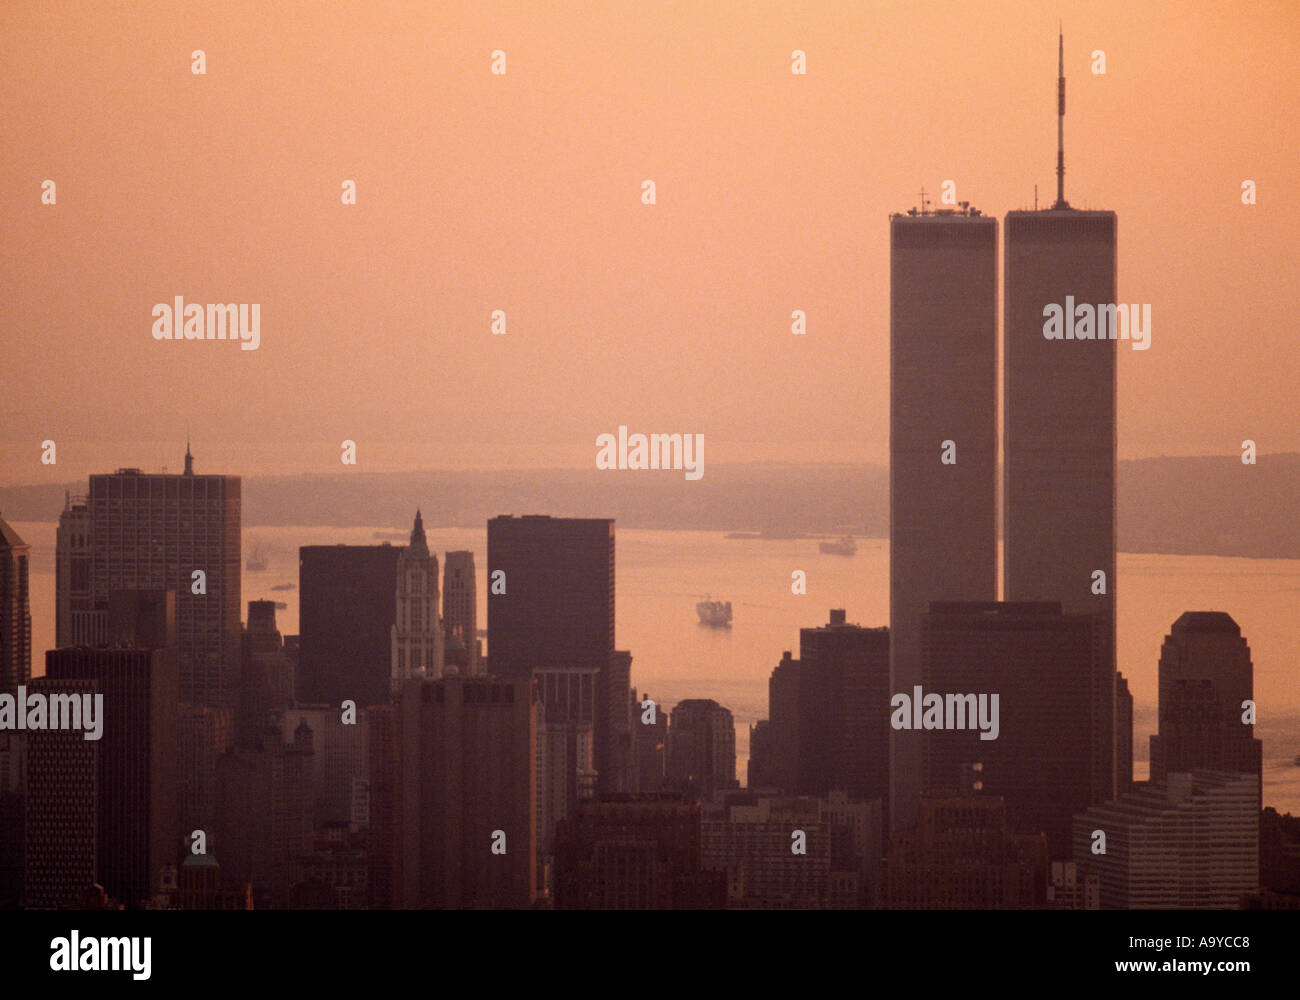 World Trade Center Twin Towers in Manhattan Island in New York City in the United States of America USA Stock Photo